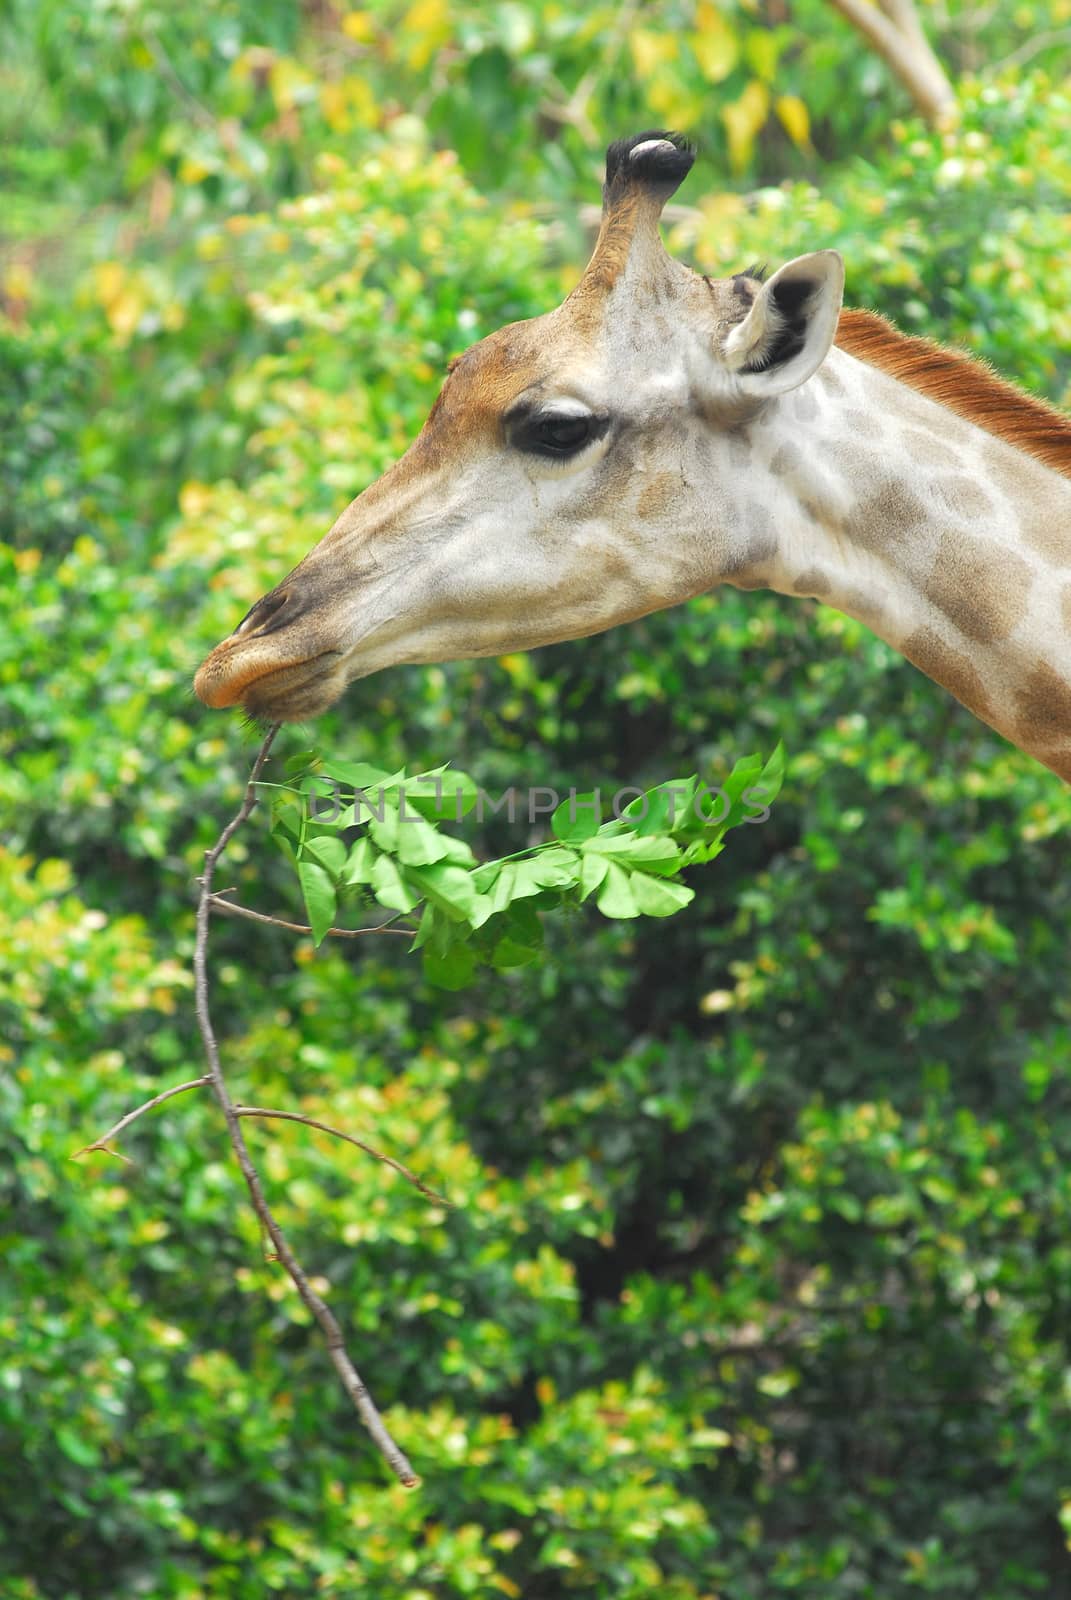 Young adult giraffe eating leaves by think4photop